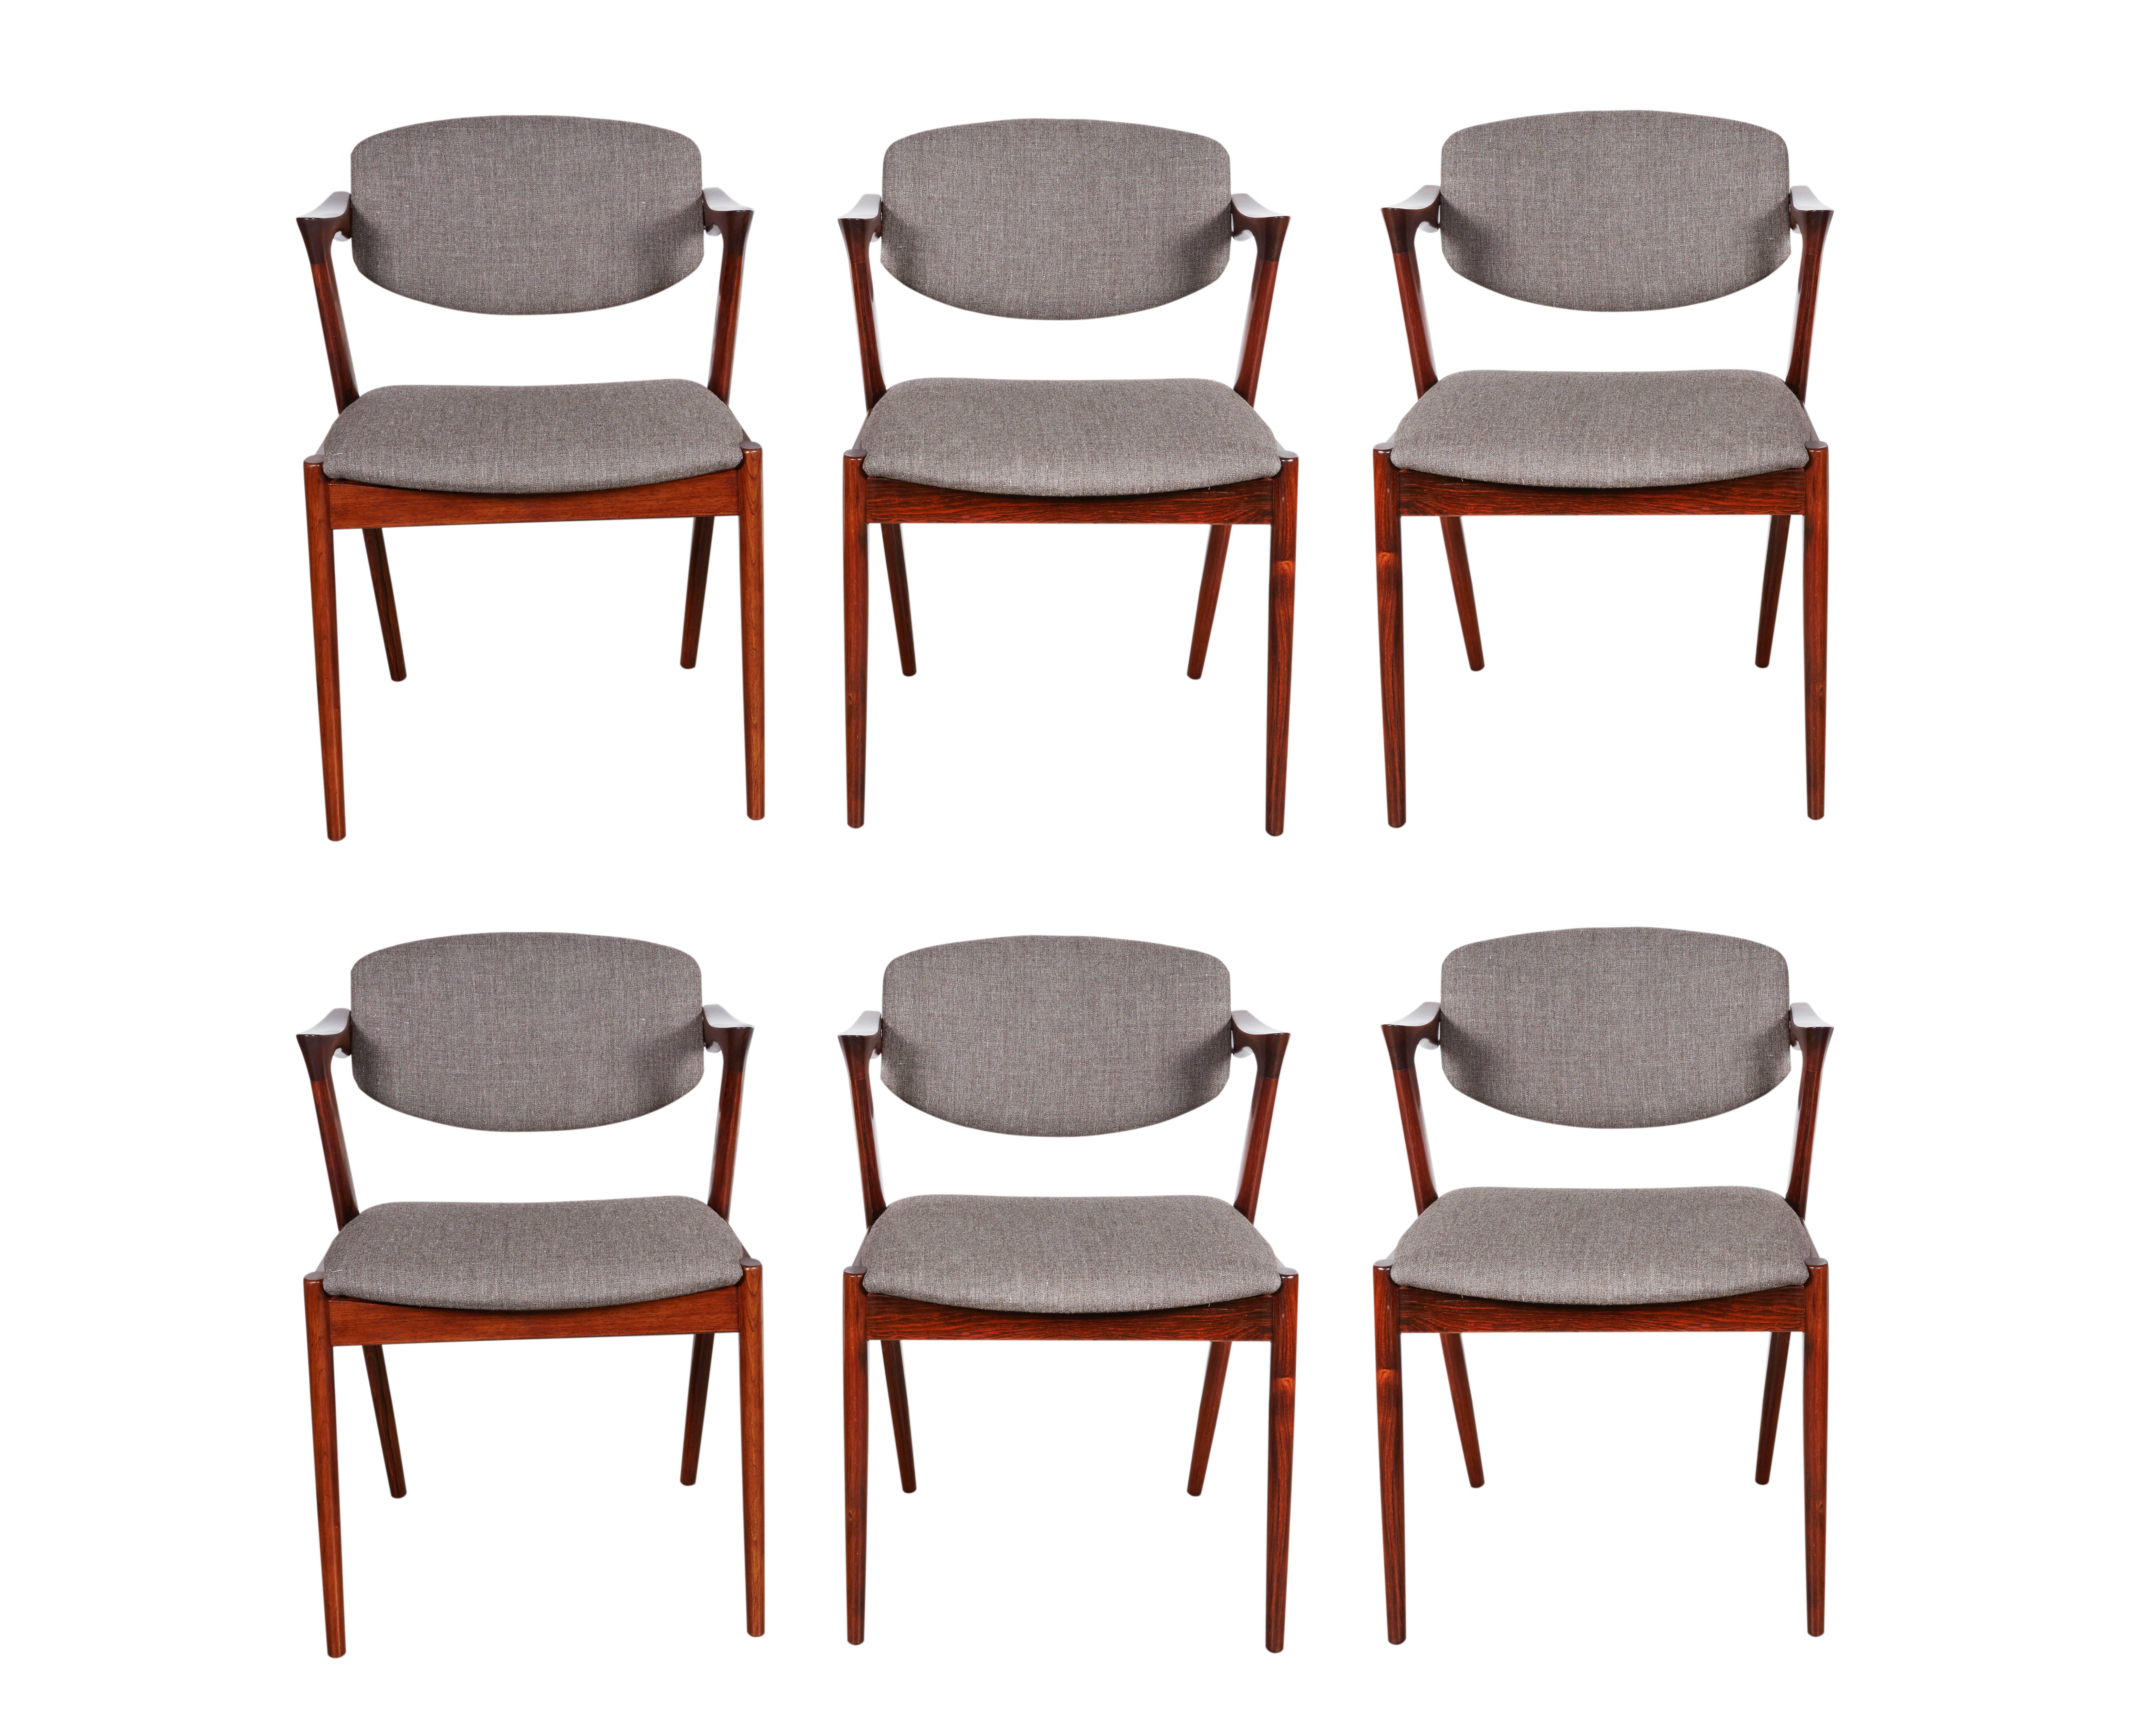 Vintage 1950s Rosewood Danish Dining Chairs by Kai Kristiansen

These vintage side chairs are in like-new condition. The swivel back that adjust to your back makes it like a little lounge chair at the dining table. The most comfortable dining chair